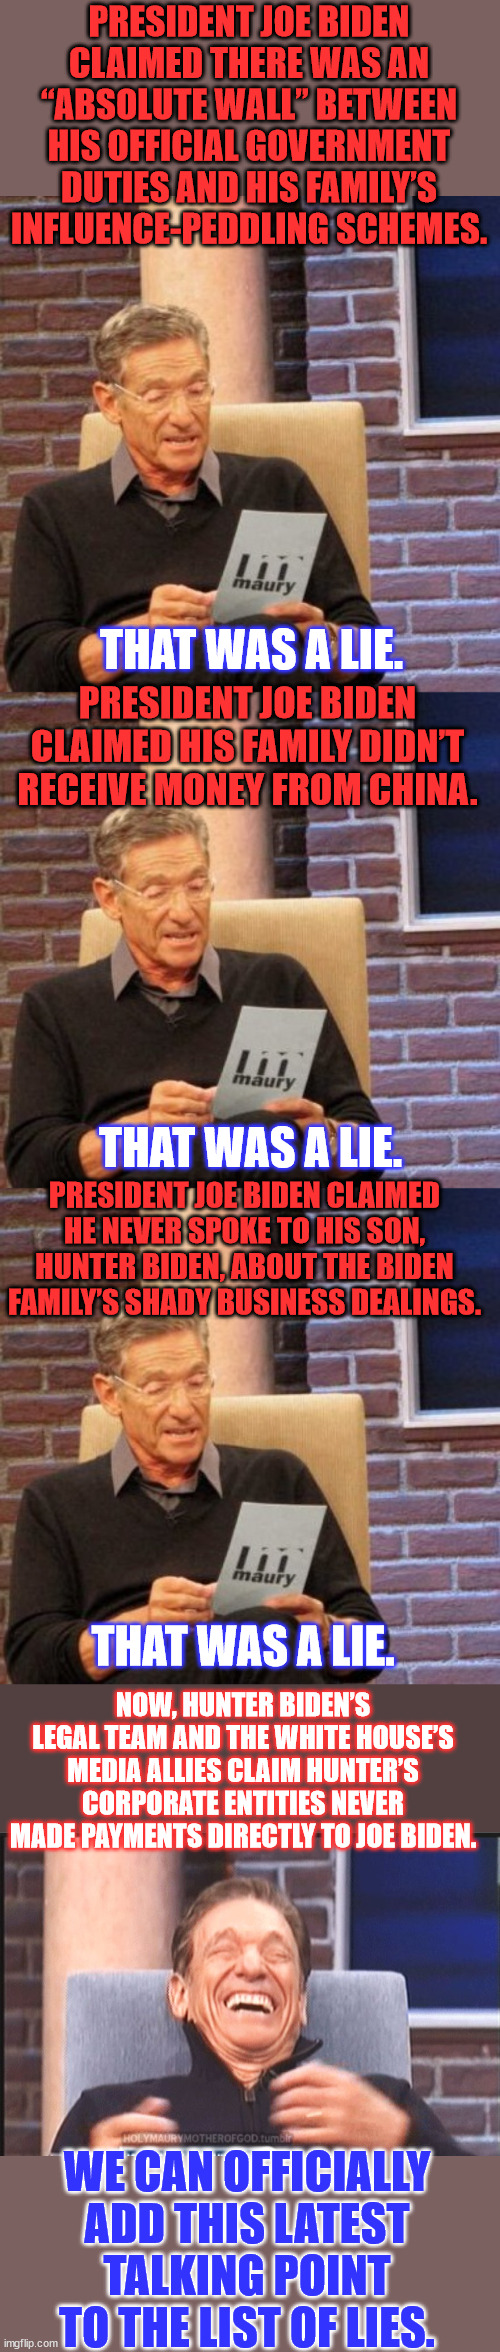 Biden crime family pack of lies... | PRESIDENT JOE BIDEN CLAIMED THERE WAS AN “ABSOLUTE WALL” BETWEEN HIS OFFICIAL GOVERNMENT DUTIES AND HIS FAMILY’S INFLUENCE-PEDDLING SCHEMES. THAT WAS A LIE. PRESIDENT JOE BIDEN CLAIMED HIS FAMILY DIDN’T RECEIVE MONEY FROM CHINA. THAT WAS A LIE. PRESIDENT JOE BIDEN CLAIMED HE NEVER SPOKE TO HIS SON, HUNTER BIDEN, ABOUT THE BIDEN FAMILY’S SHADY BUSINESS DEALINGS. THAT WAS A LIE. NOW, HUNTER BIDEN’S LEGAL TEAM AND THE WHITE HOUSE’S MEDIA ALLIES CLAIM HUNTER’S CORPORATE ENTITIES NEVER MADE PAYMENTS DIRECTLY TO JOE BIDEN. WE CAN OFFICIALLY ADD THIS LATEST TALKING POINT TO THE LIST OF LIES. | image tagged in memes,maury lie detector,biden,crime,family,lies | made w/ Imgflip meme maker